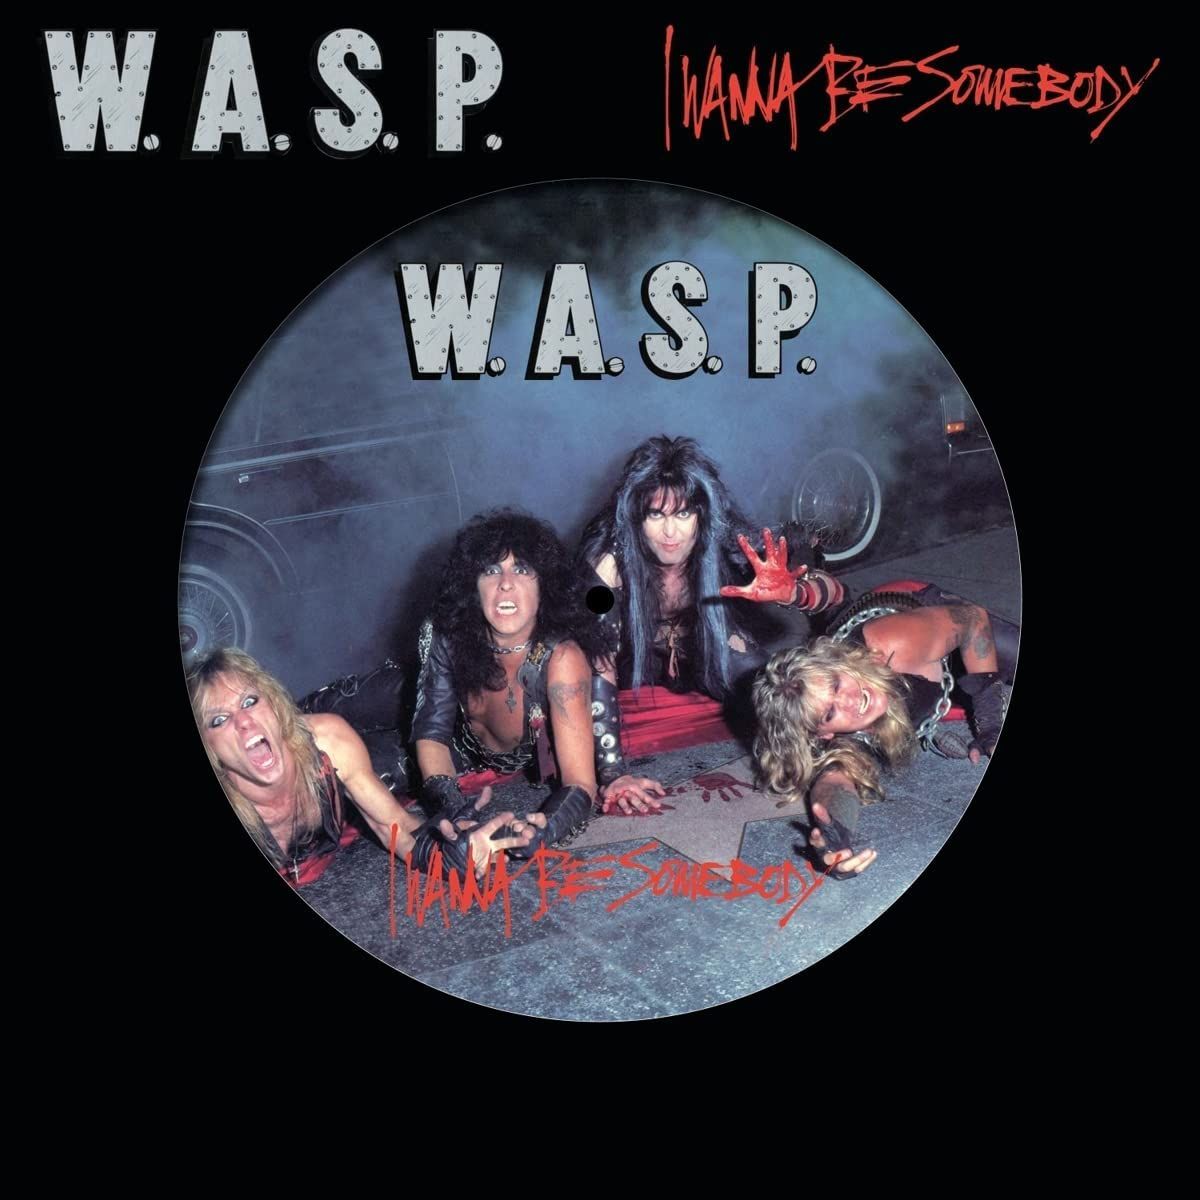 WASP - I Wanna Be Somebody (12" Picture Disc) (2022 RSD LTD ED) - Vinyl - New